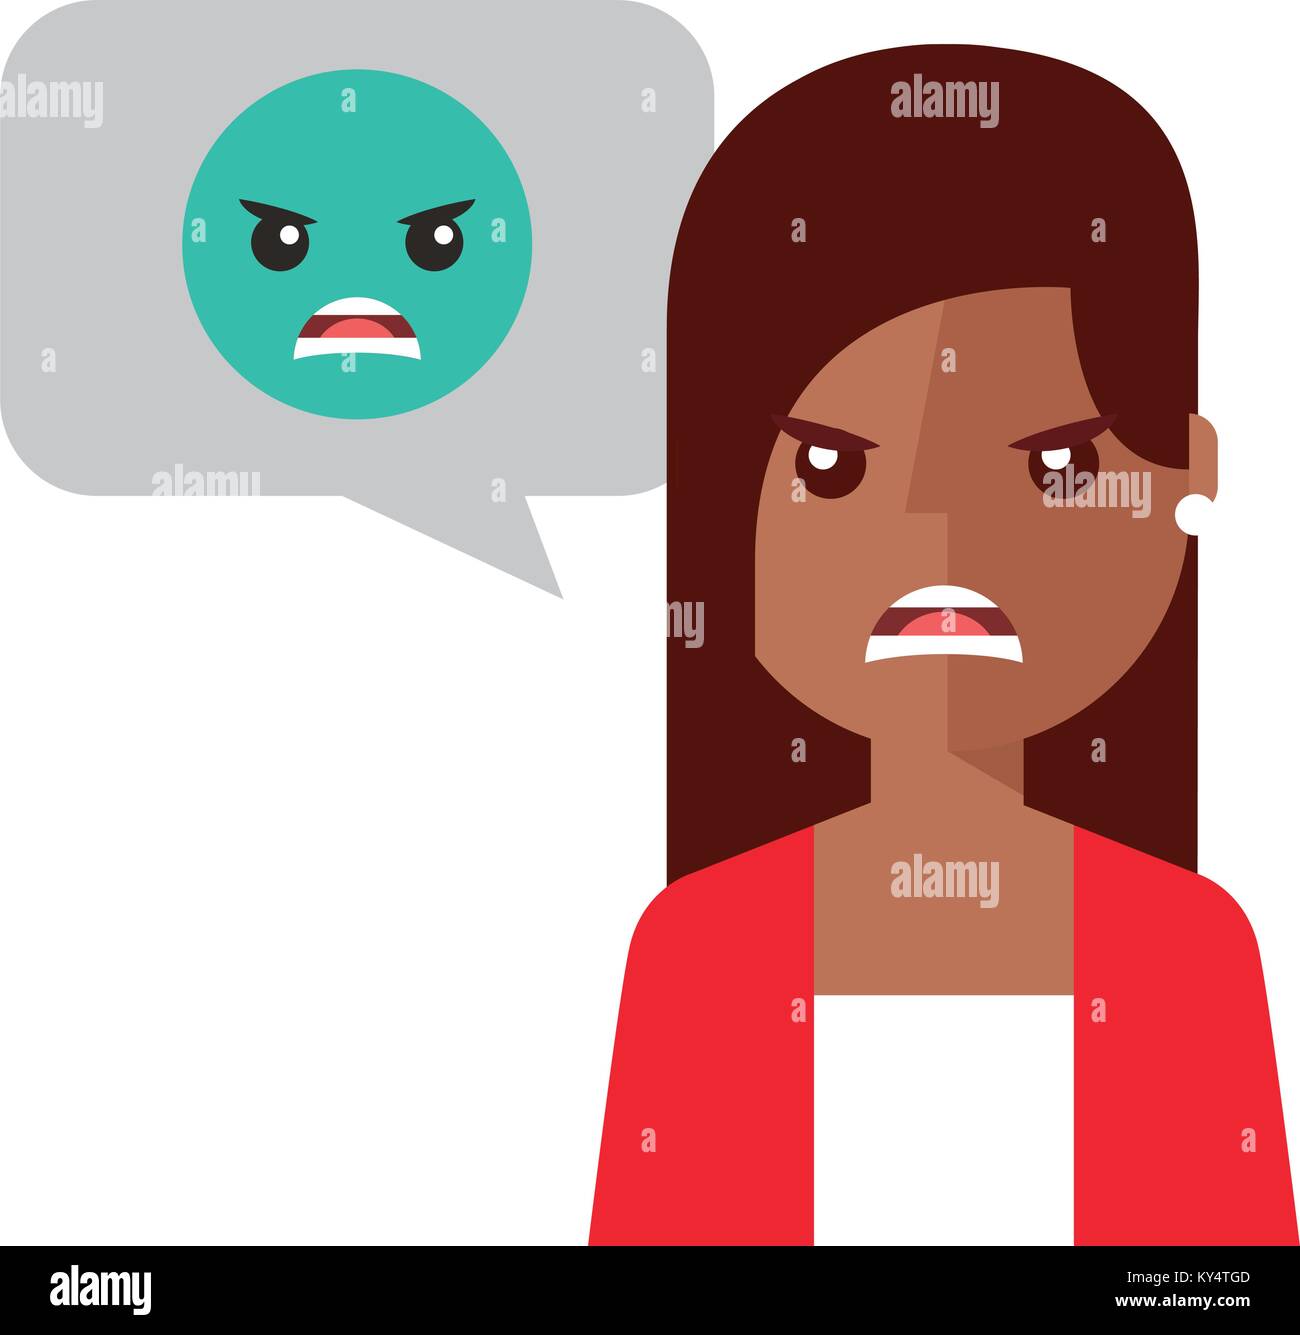 angry young woman with emoticon avatar character Stock Vector Image ...